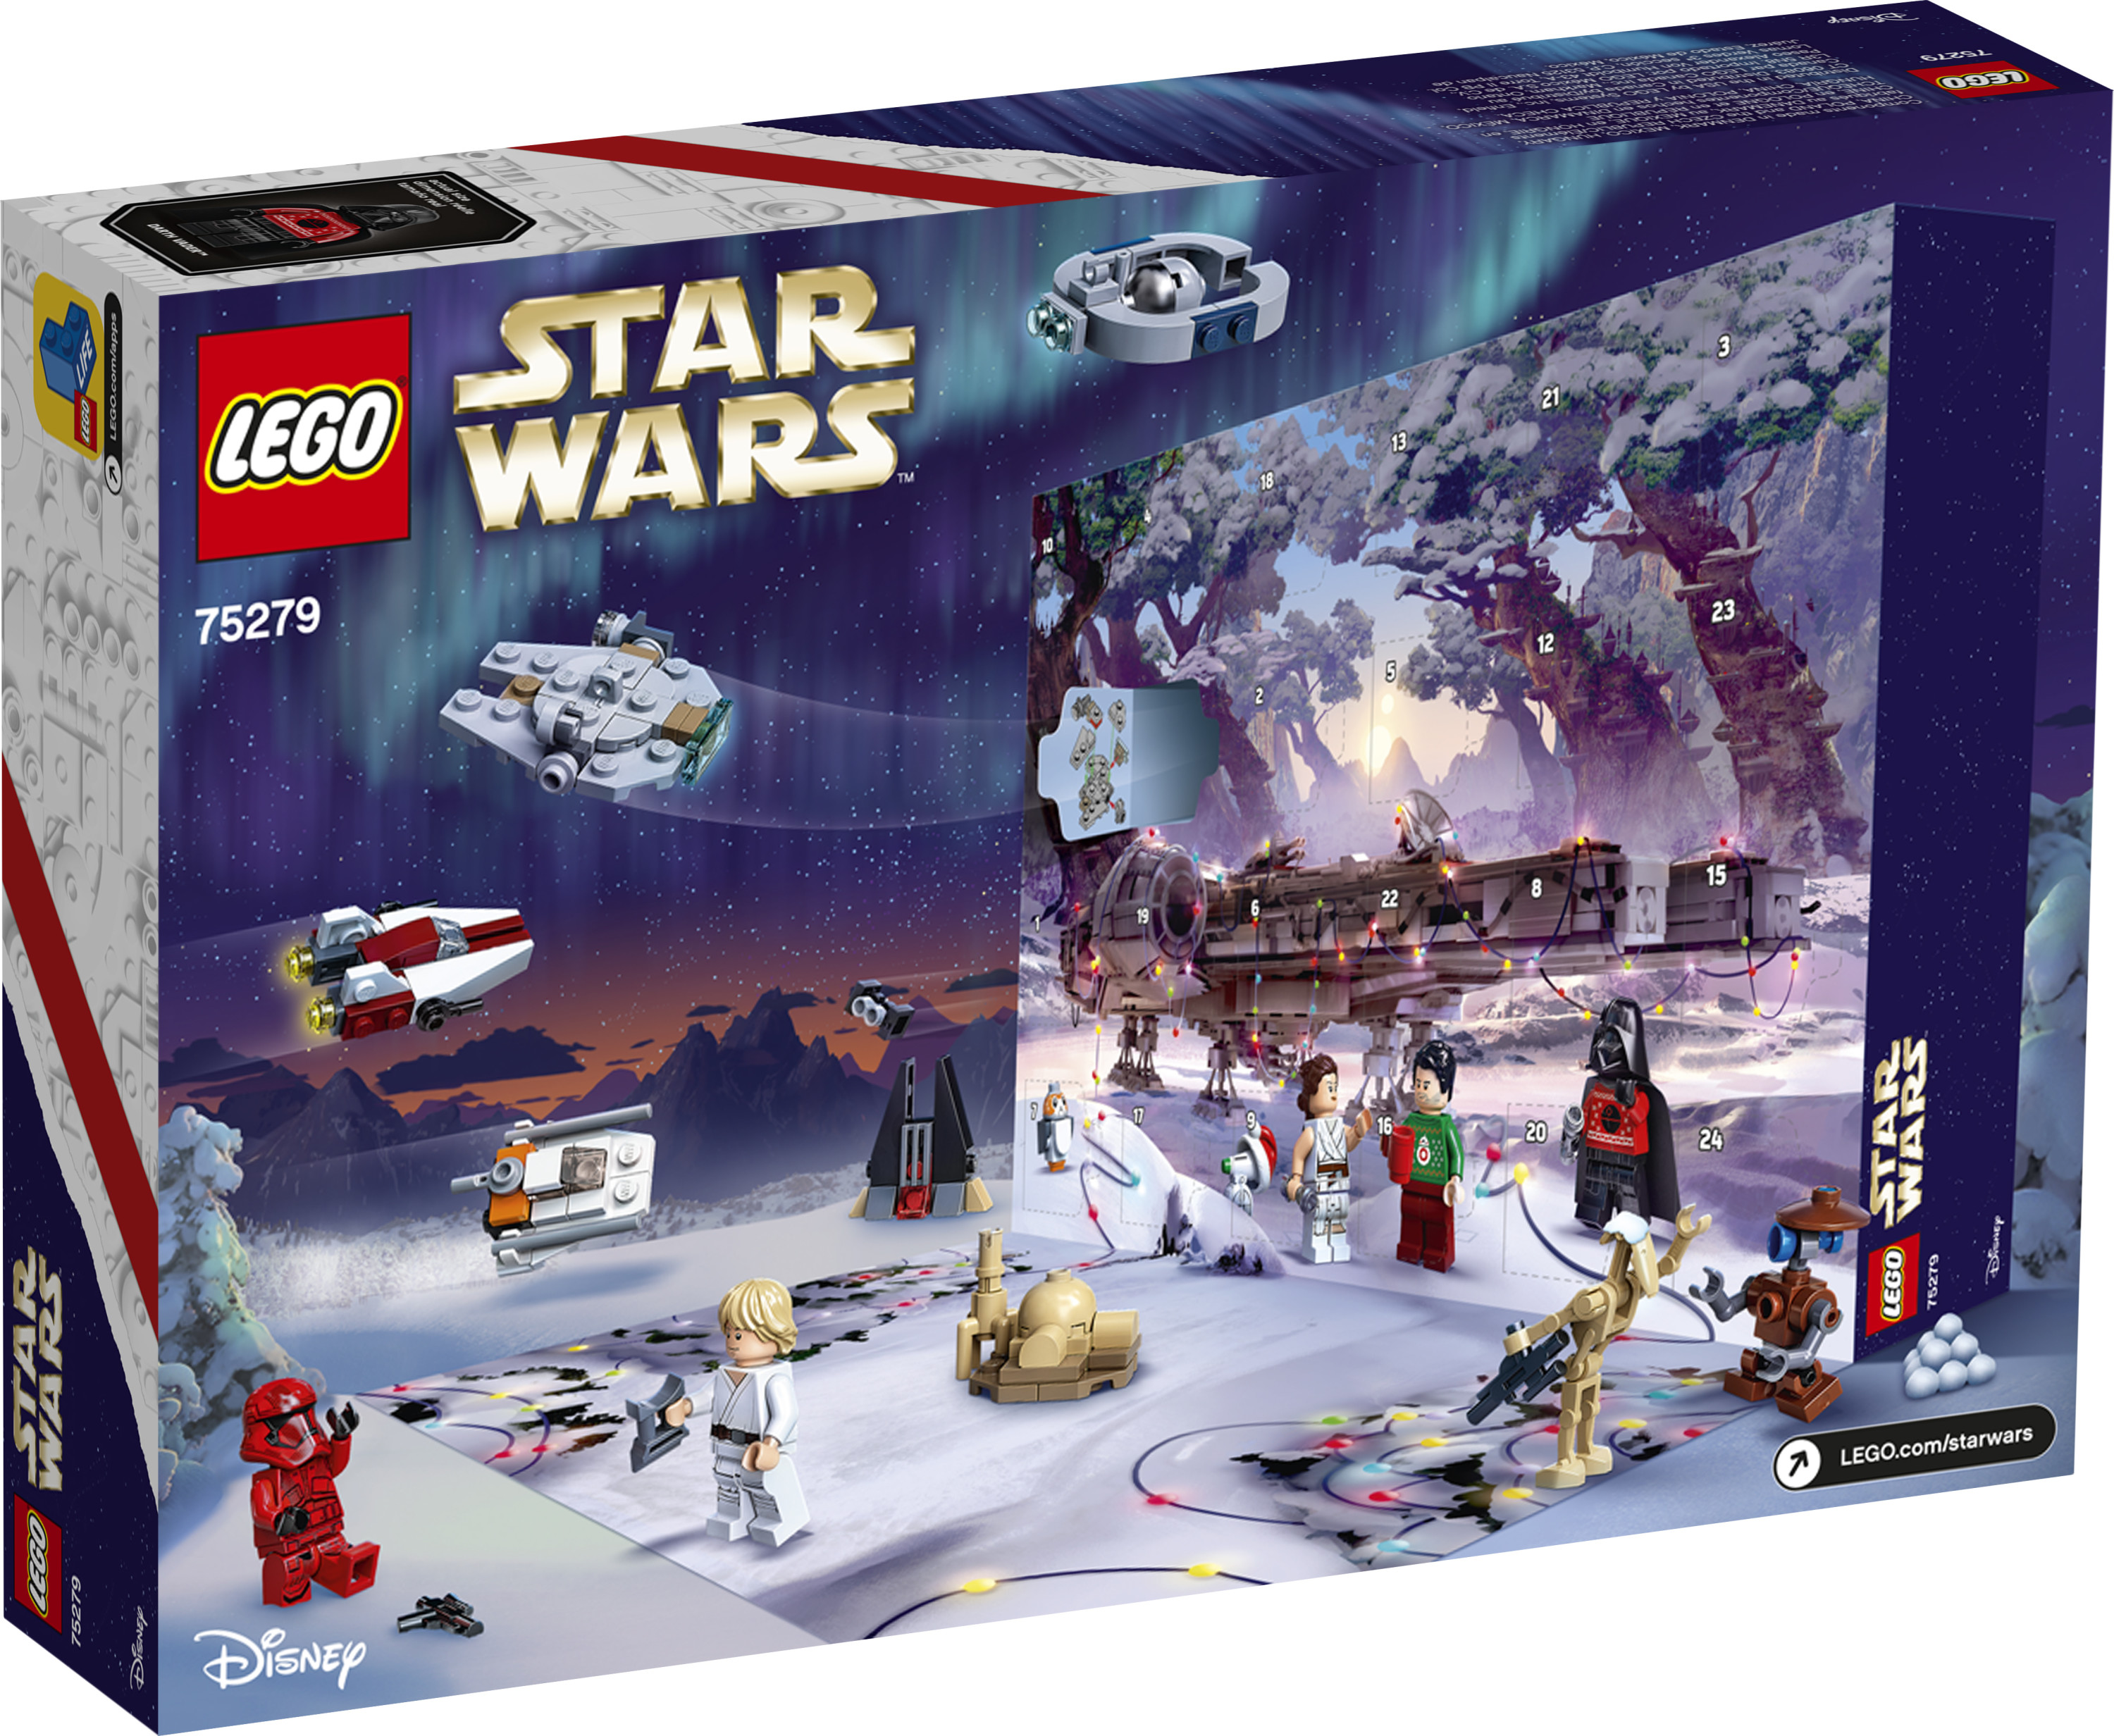 LEGO Star Wars Advent Calendar 75279 Building Kit, Fun Christmas Countdown Calendar with Star Wars Buildable Toys (311 Pieces) - image 5 of 7